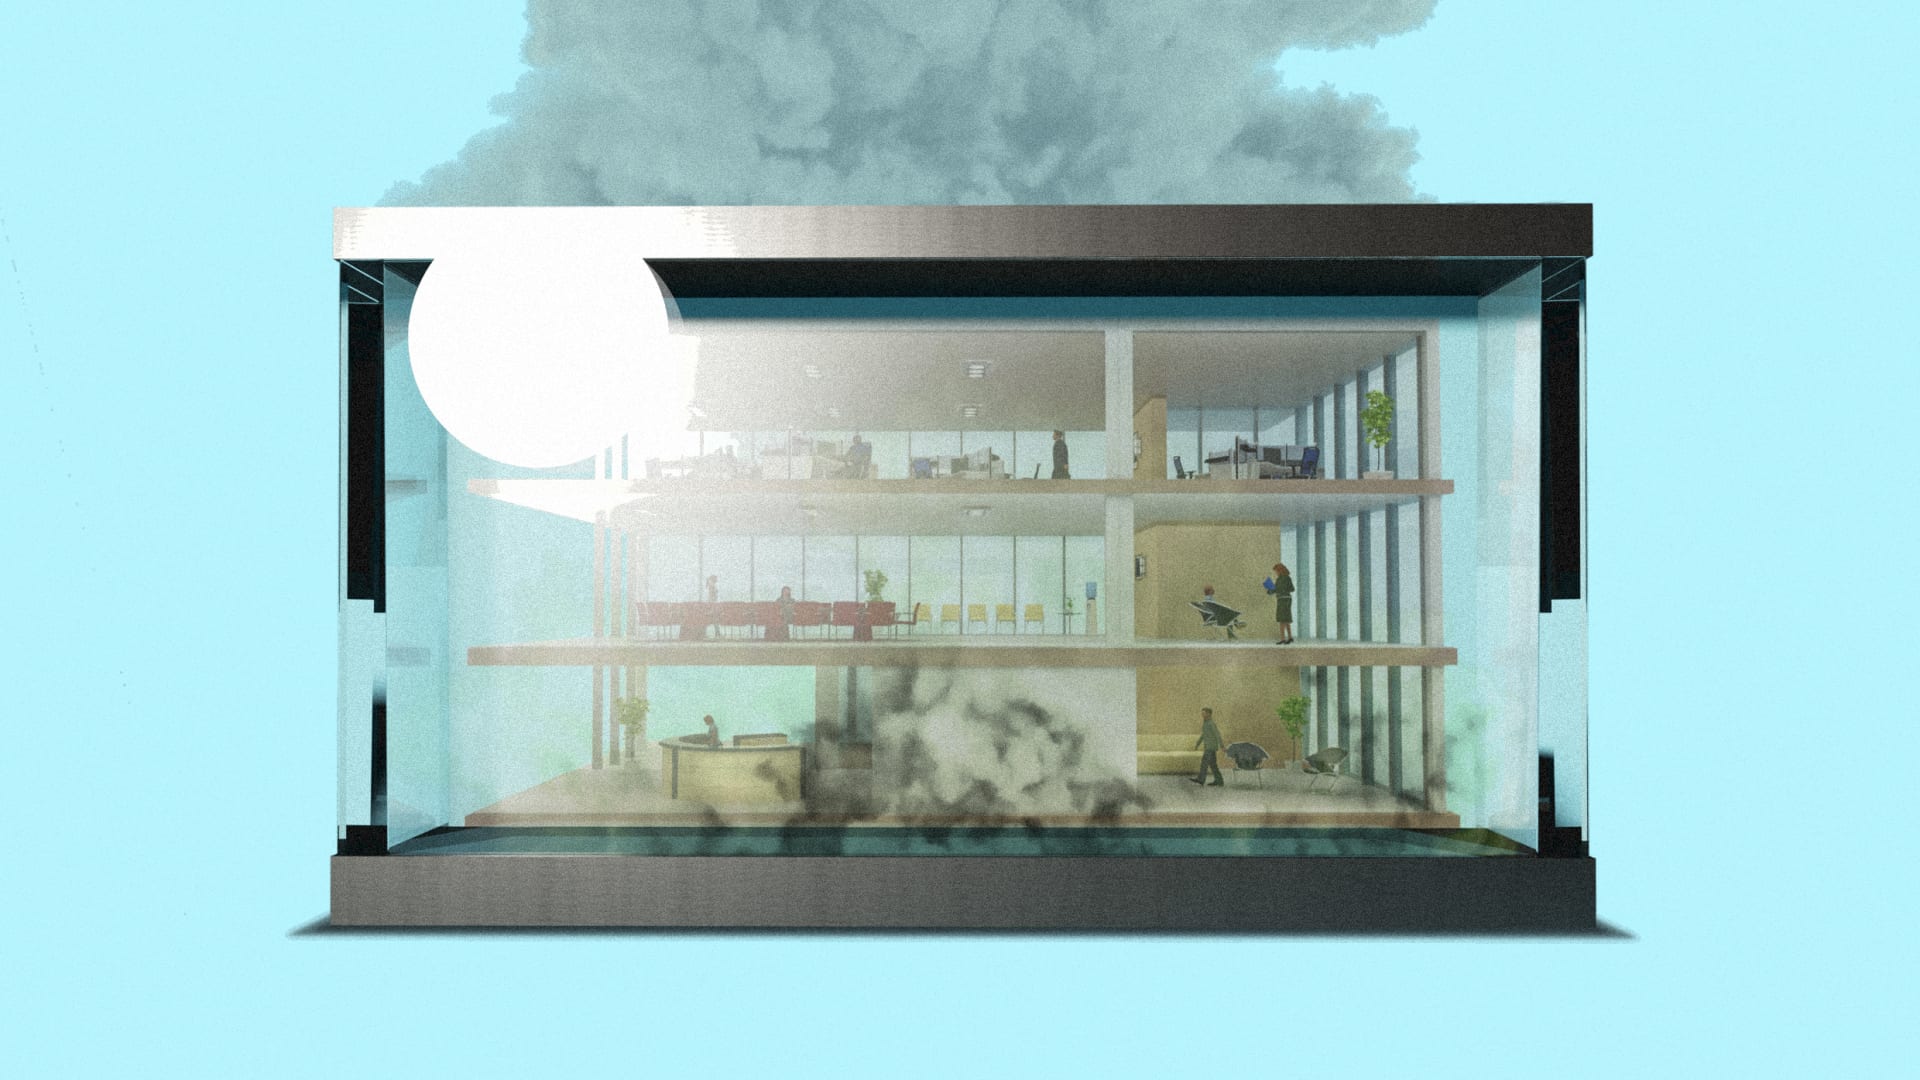 We spend 90% of our time inside—why don’t we care that indoor air is so polluted?